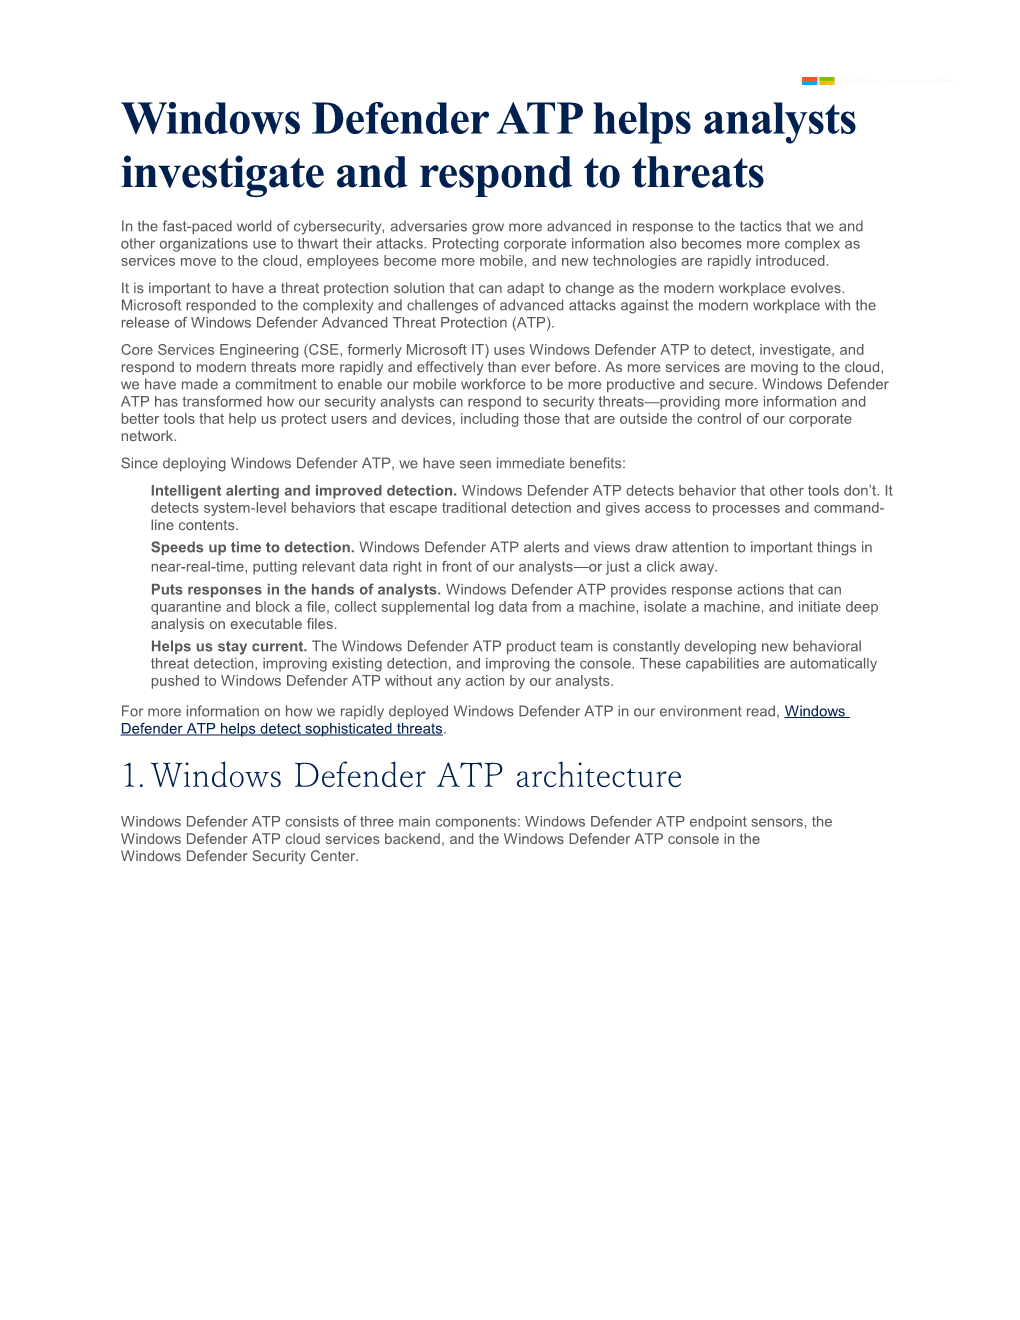 Windows Defender ATP Helps Analysts Investigate and Respond to Threats